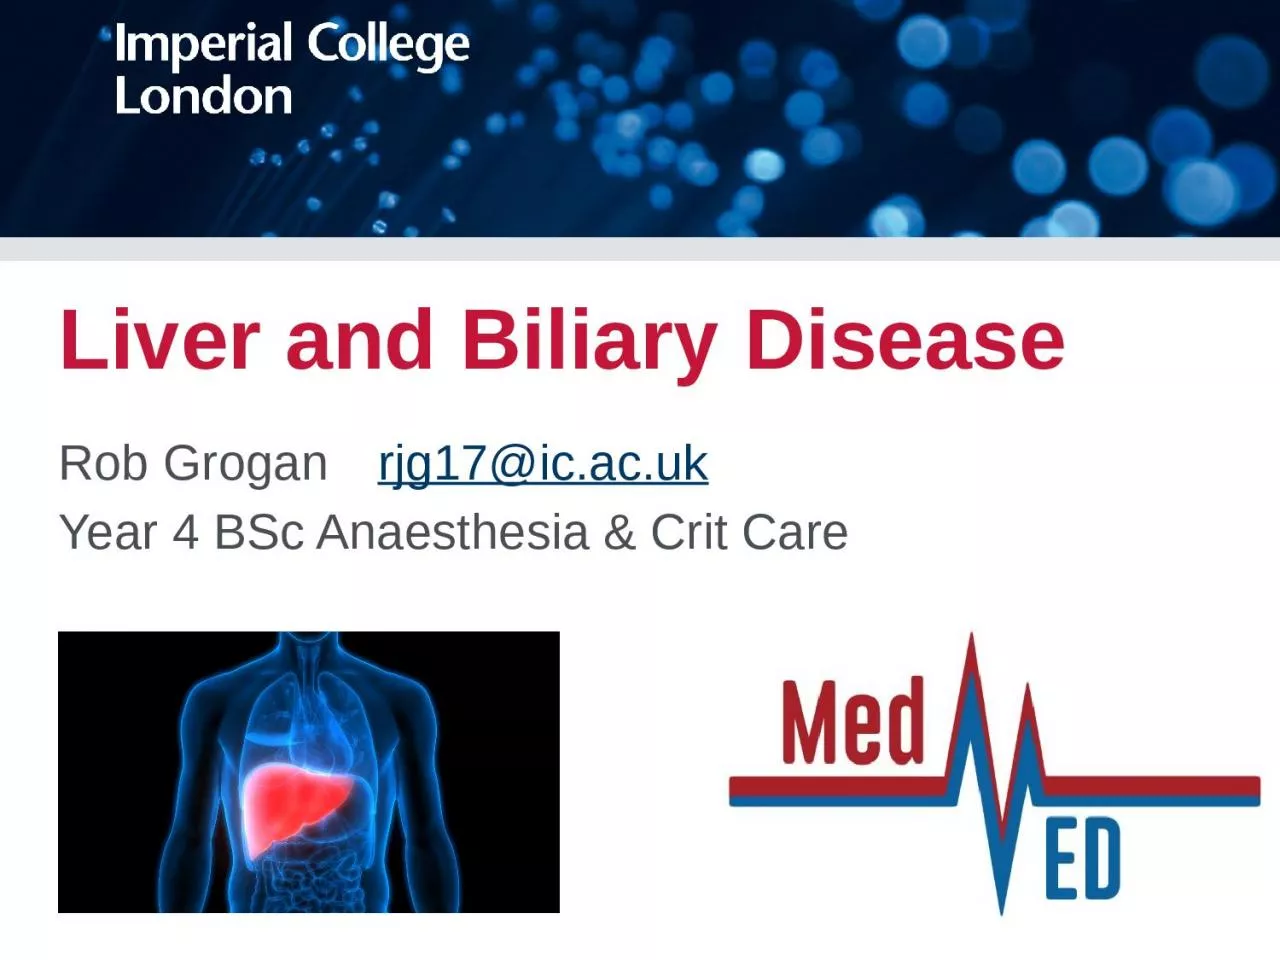 Liver and Biliary Disease